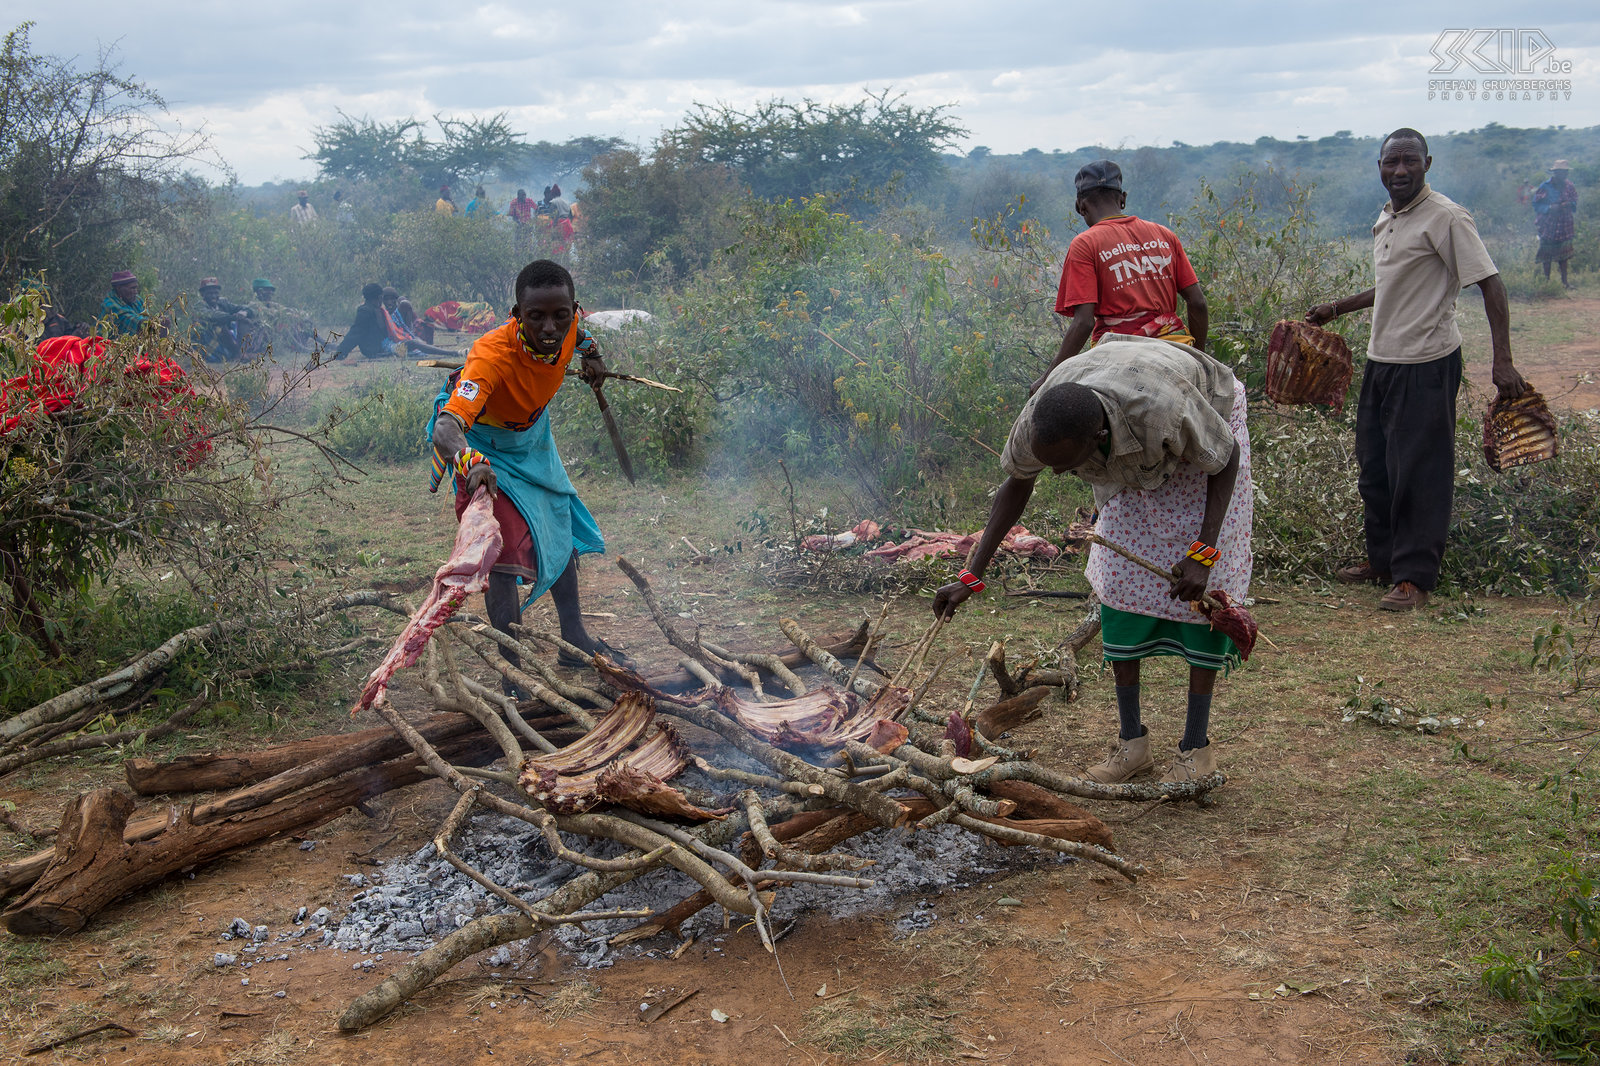 Kisima - Samburu lmuget - Roasting the meat In the late afternoon the mzee (older men) start roasting the meat for the feast which will be held in the evening. Stefan Cruysberghs